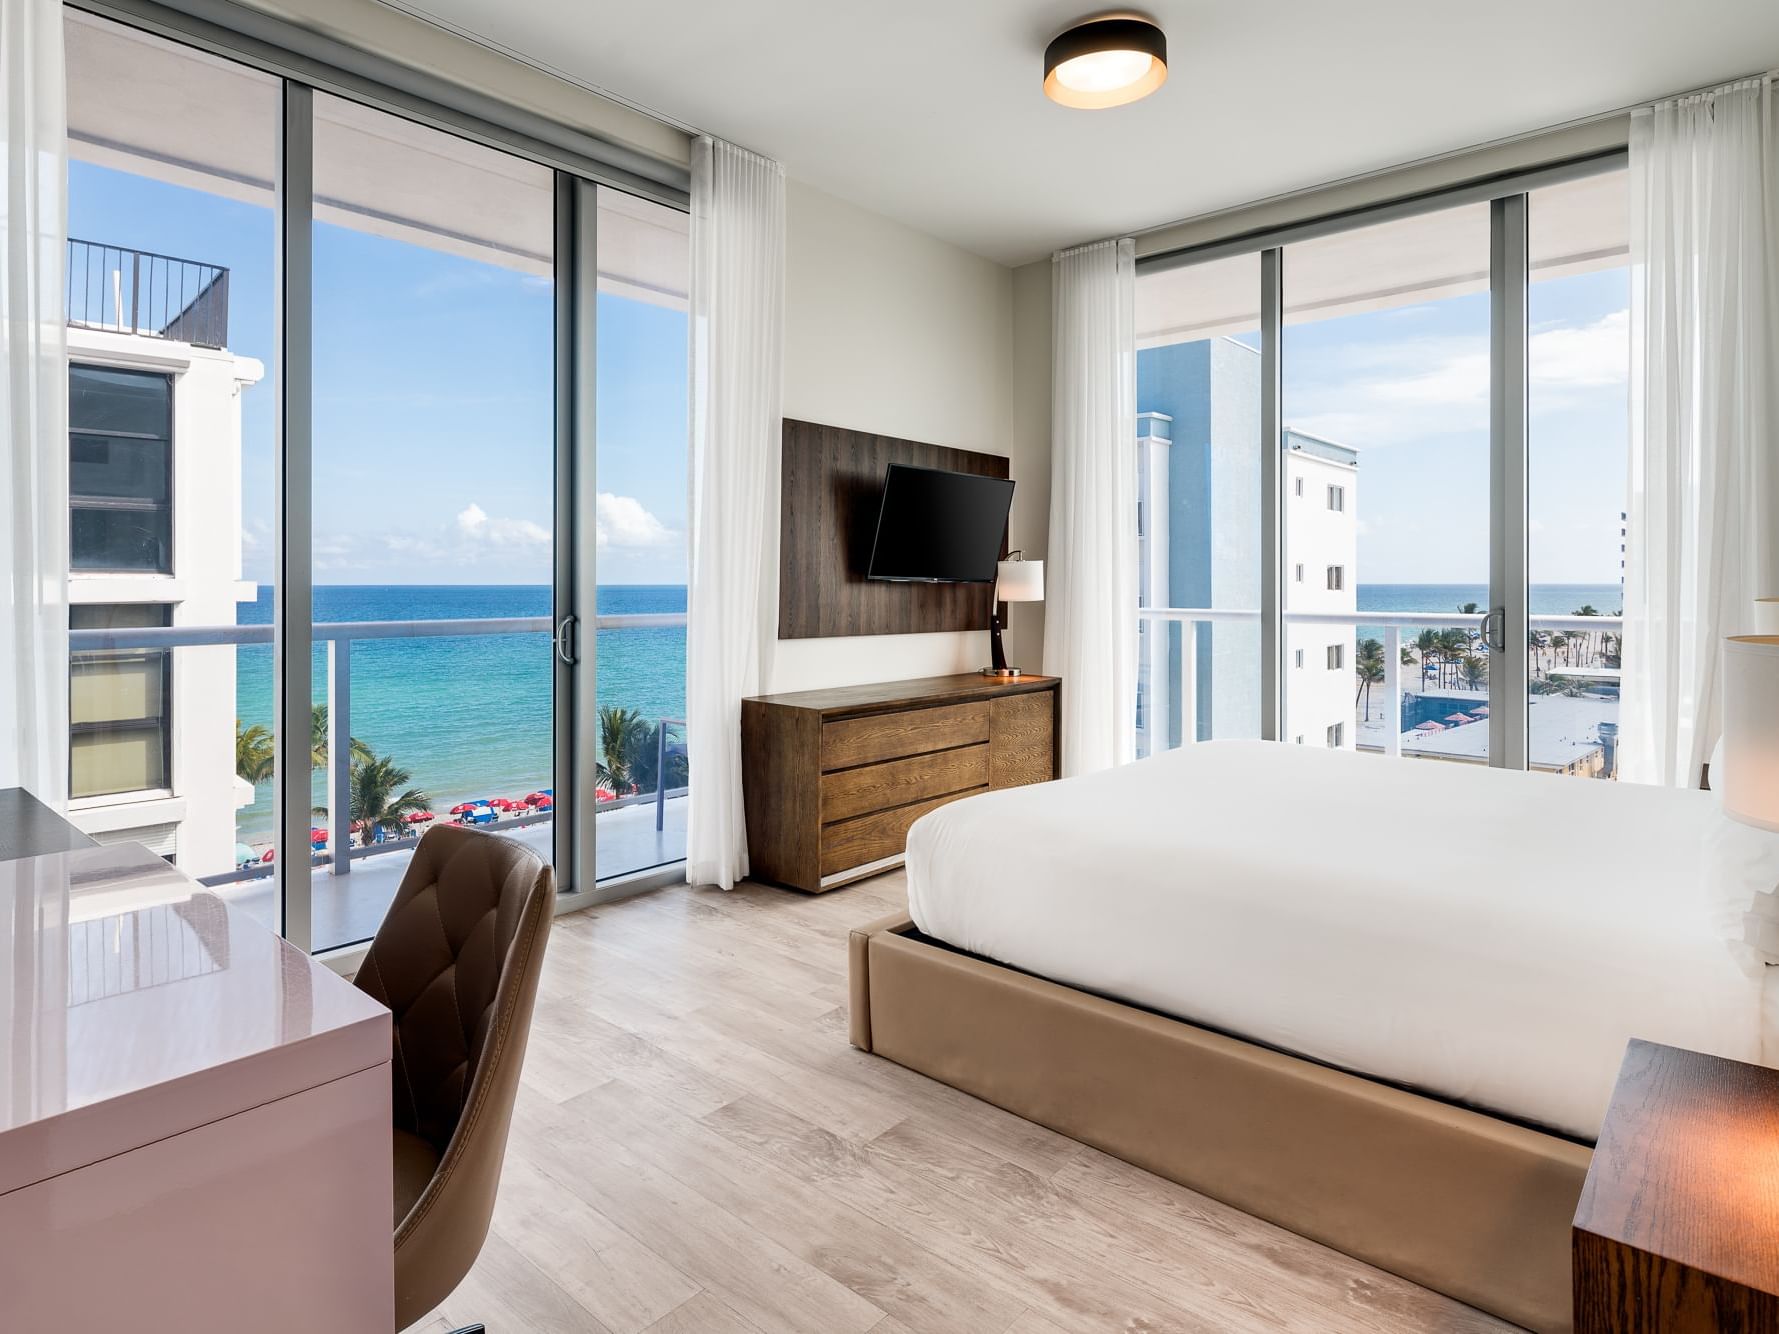 Deluxe Ocean View Suite King with Loft at Costa Hollywood Beach Resort